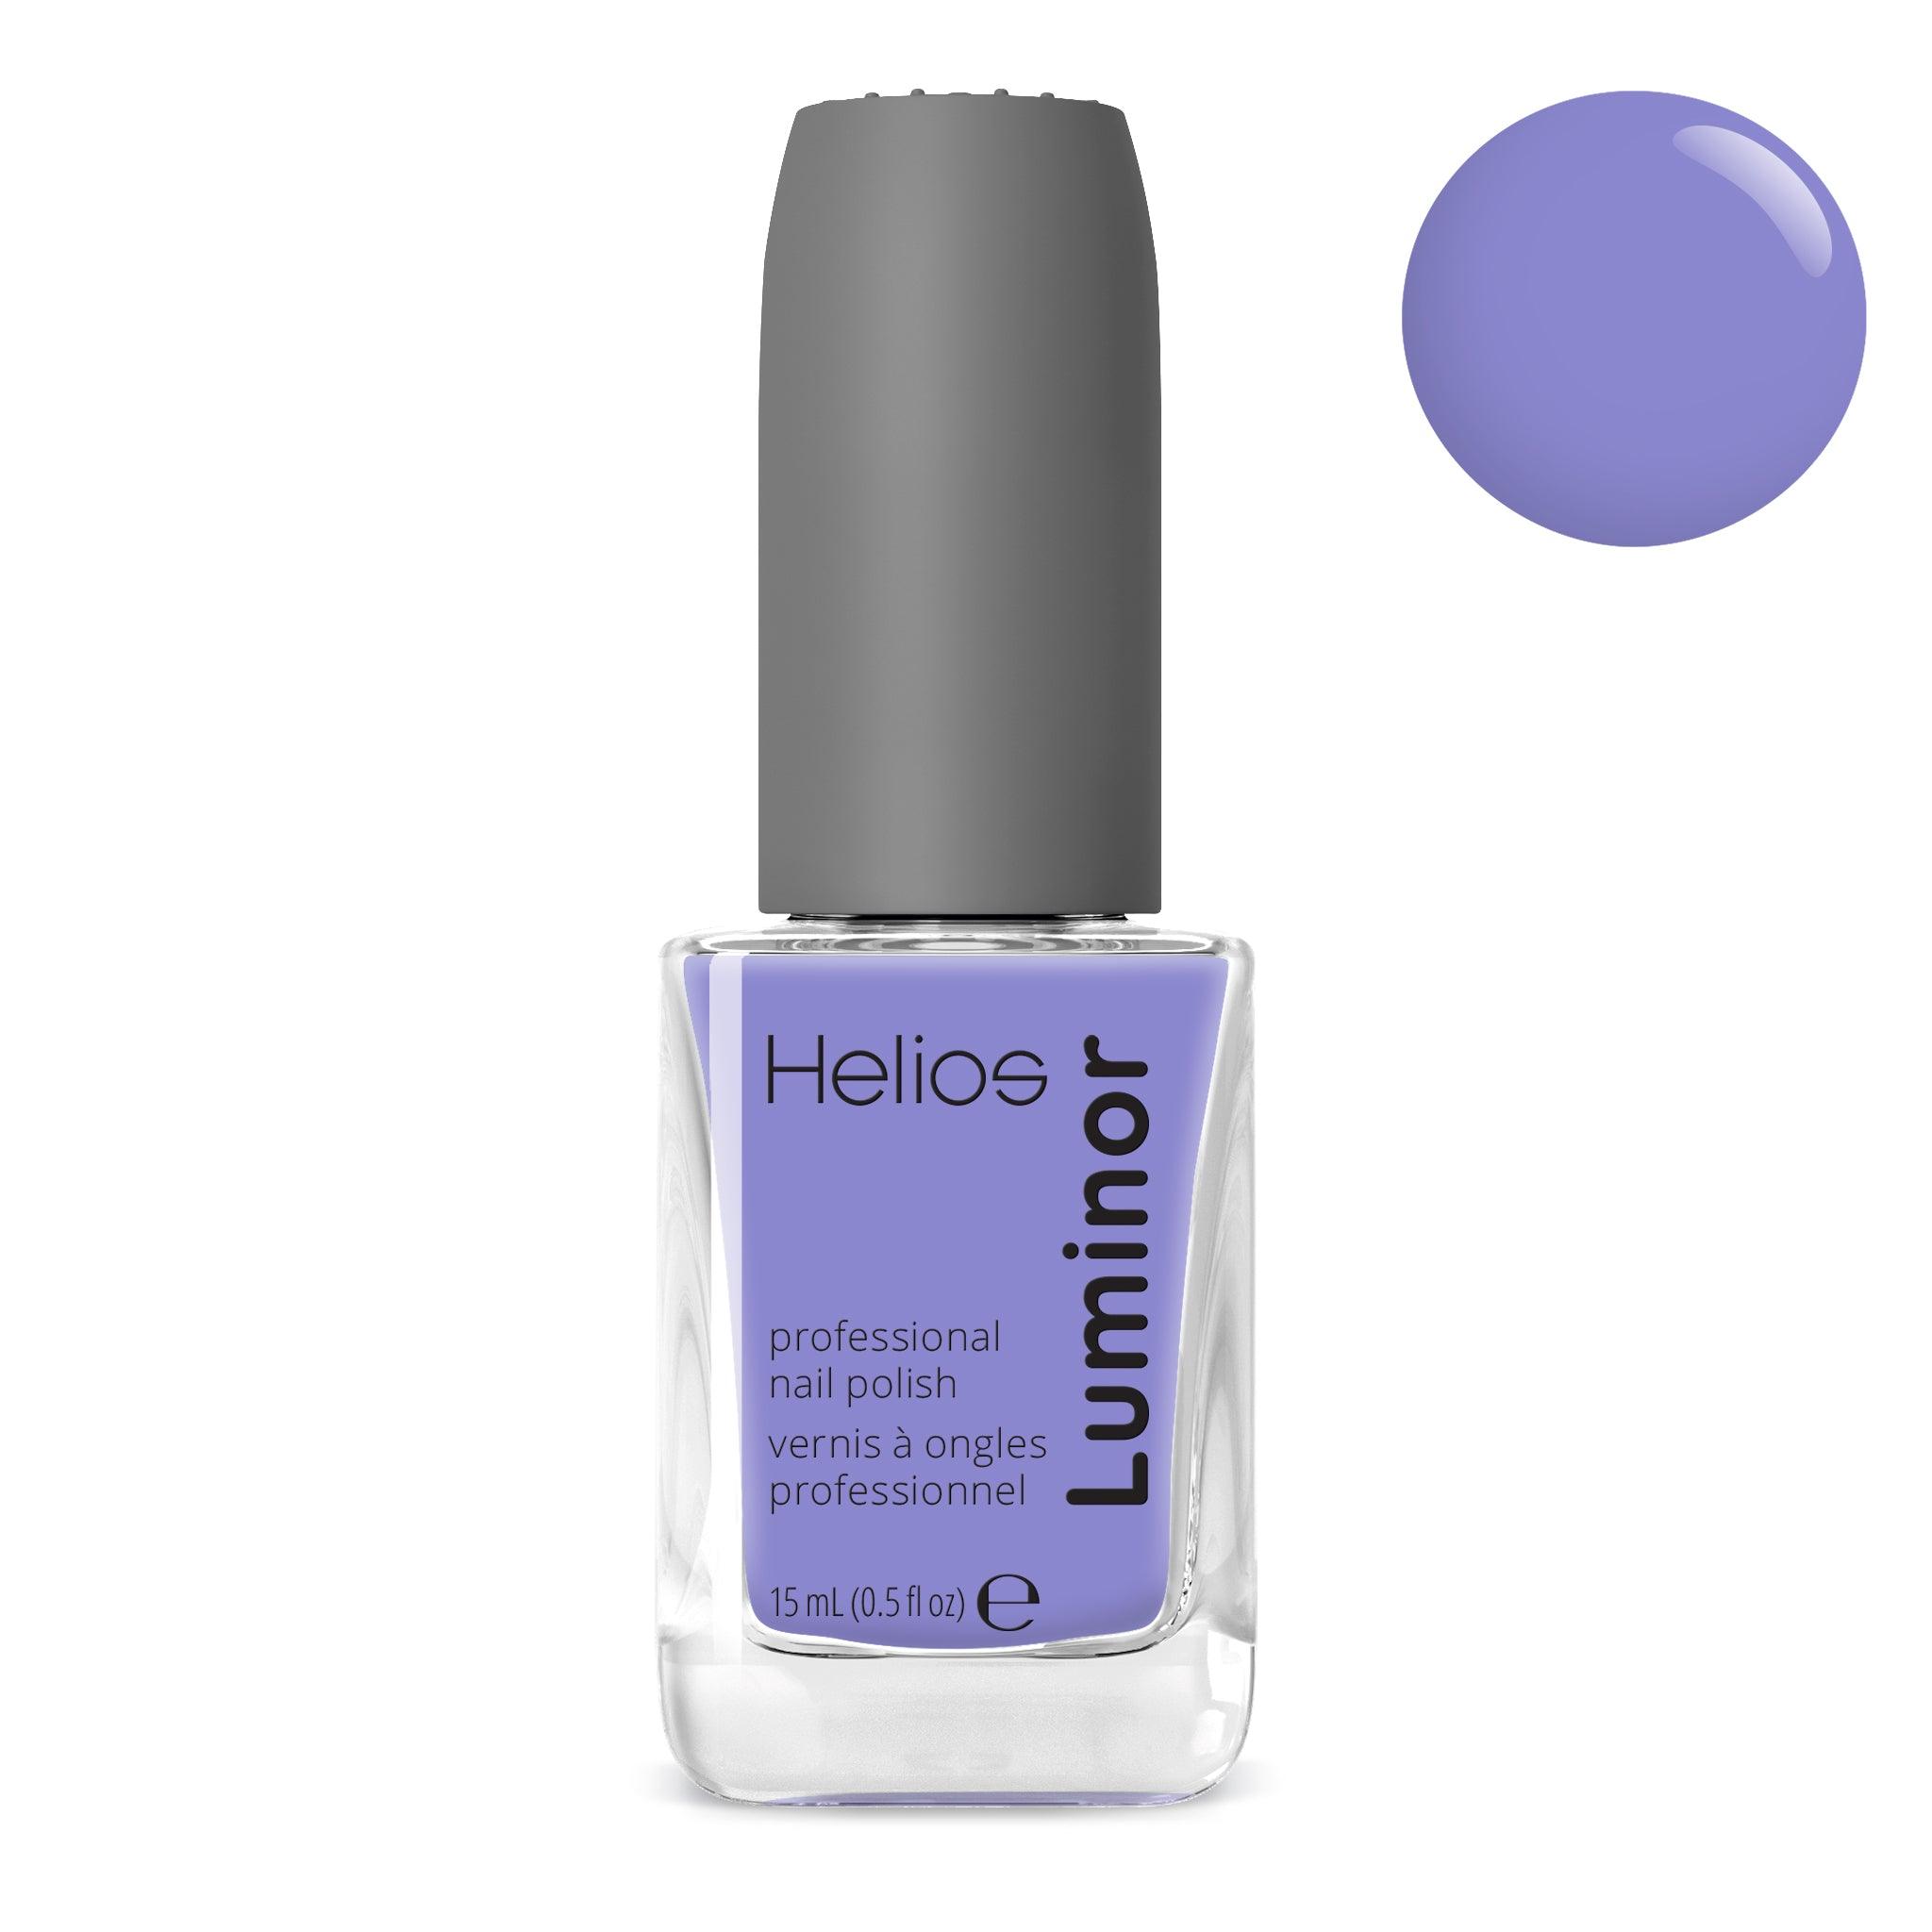 CRUSHIN' ON YOU - Helios Nail Systems